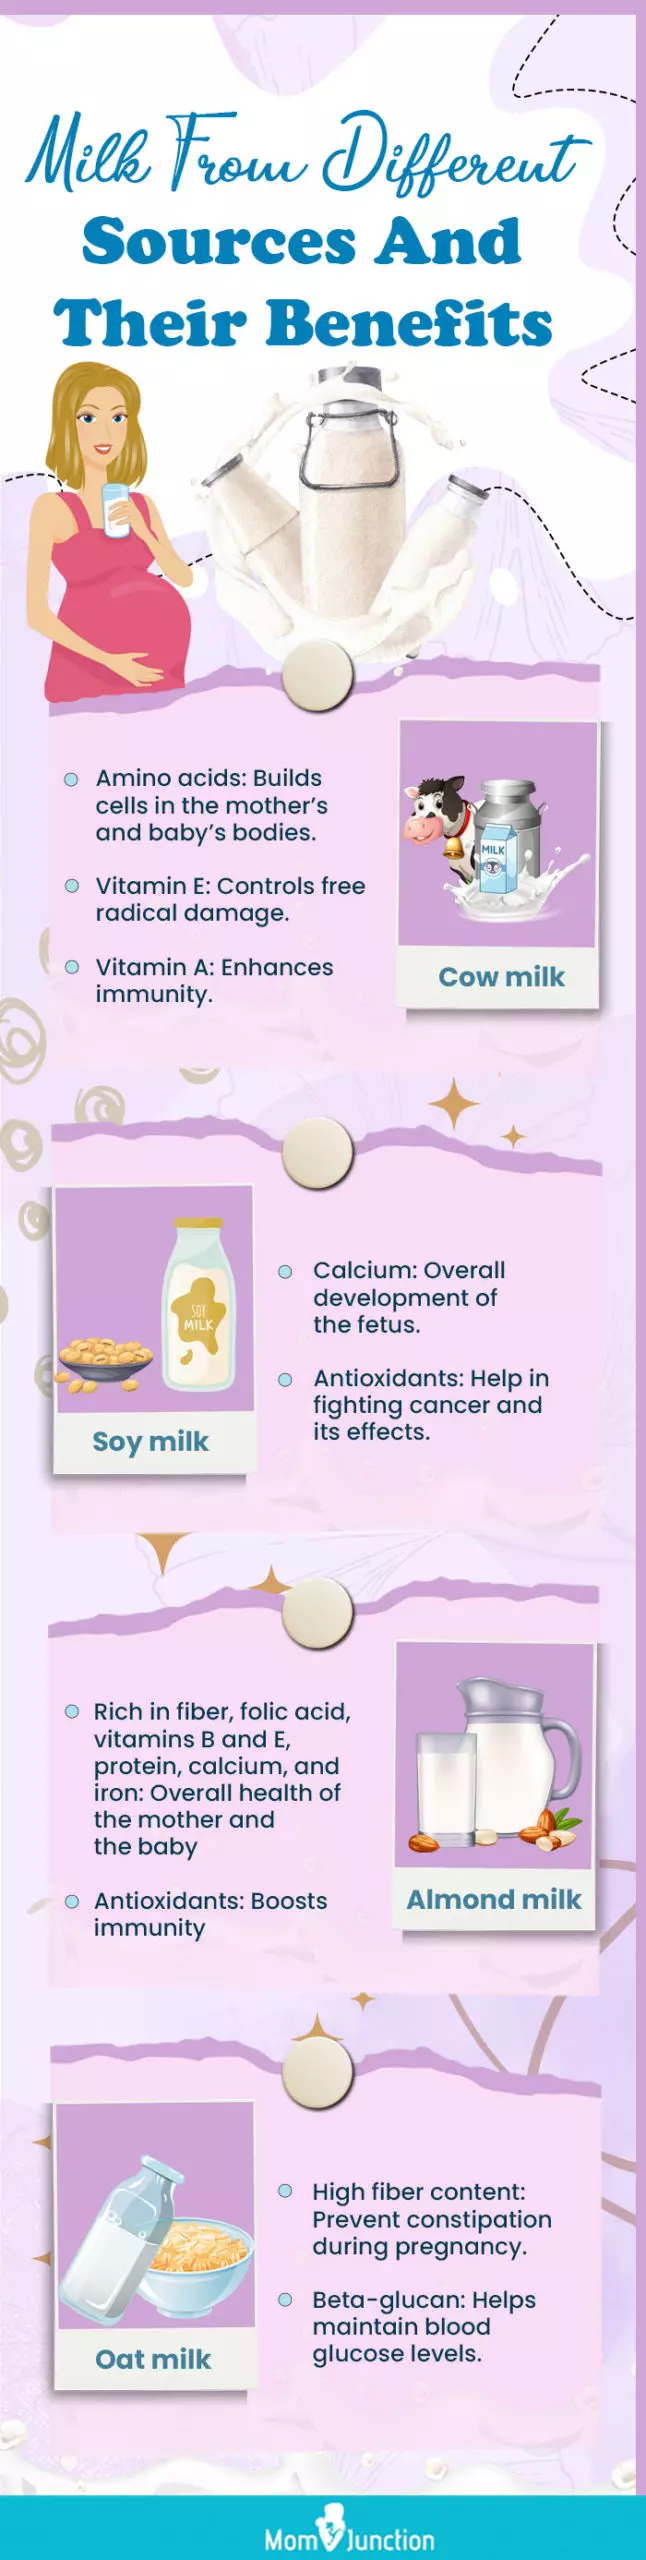 milk from different sources and their benefits (infographic)